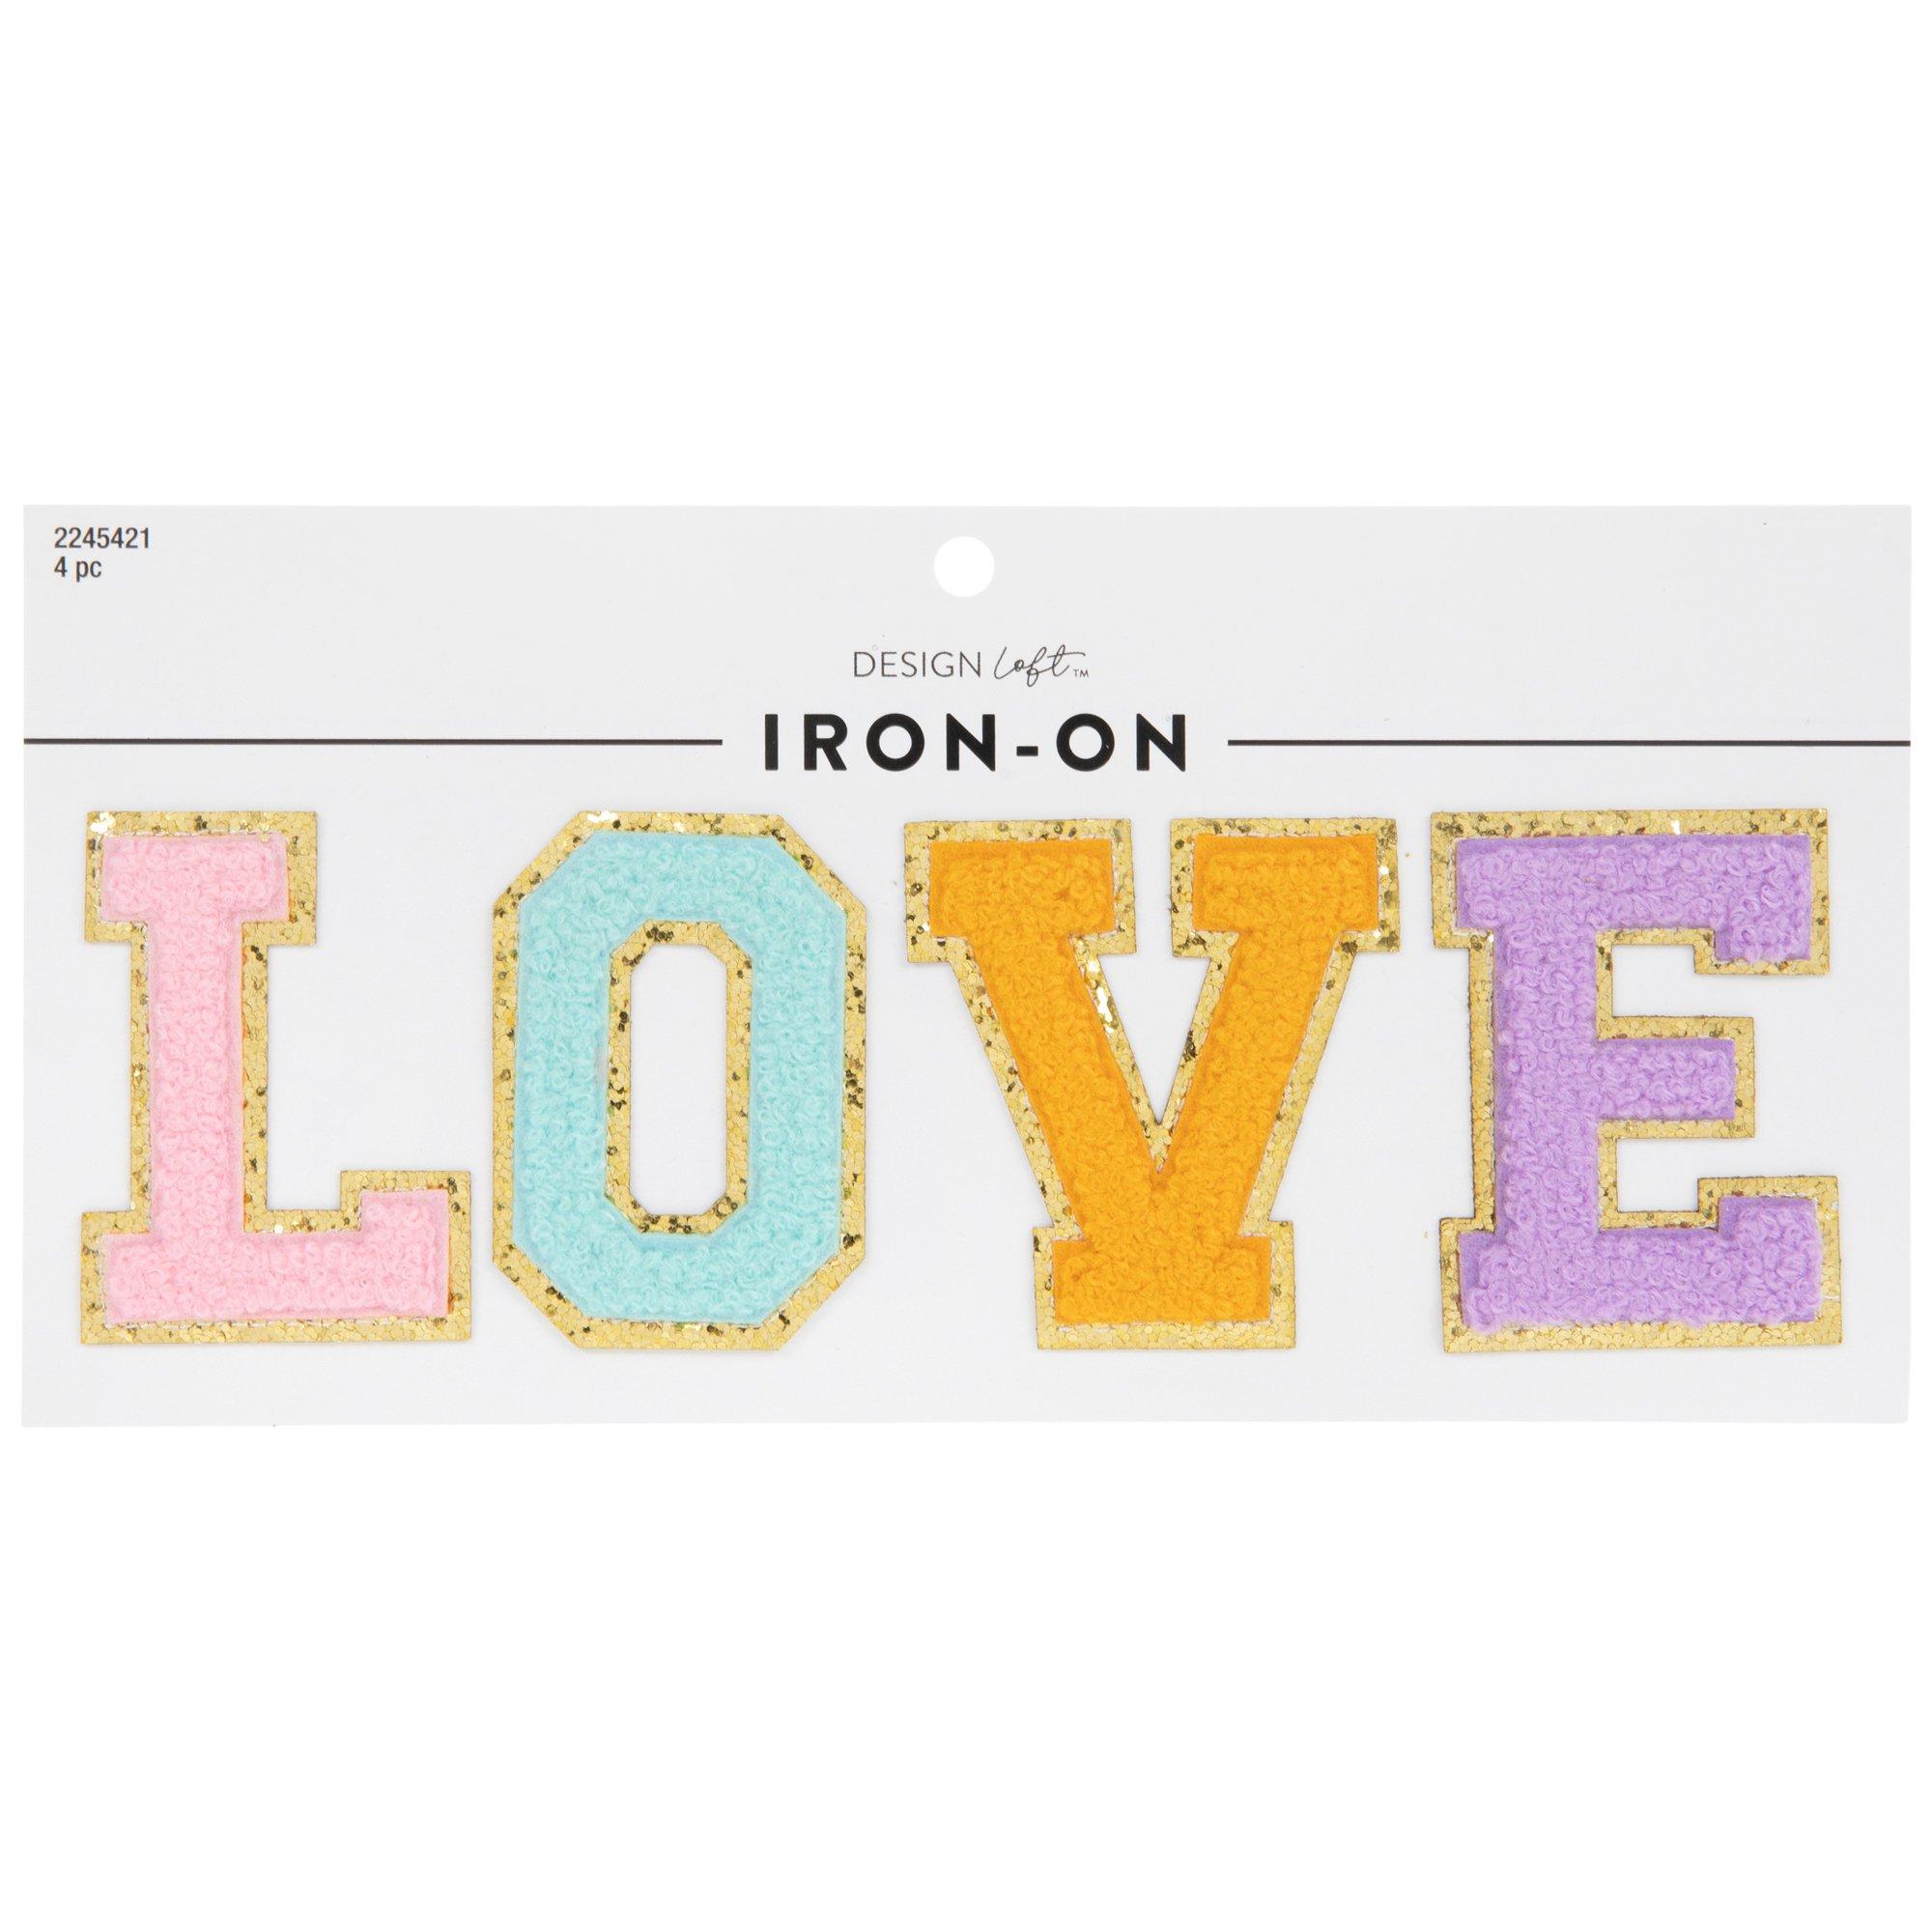 Letter Iron-On & Sticker Patch, Hobby Lobby